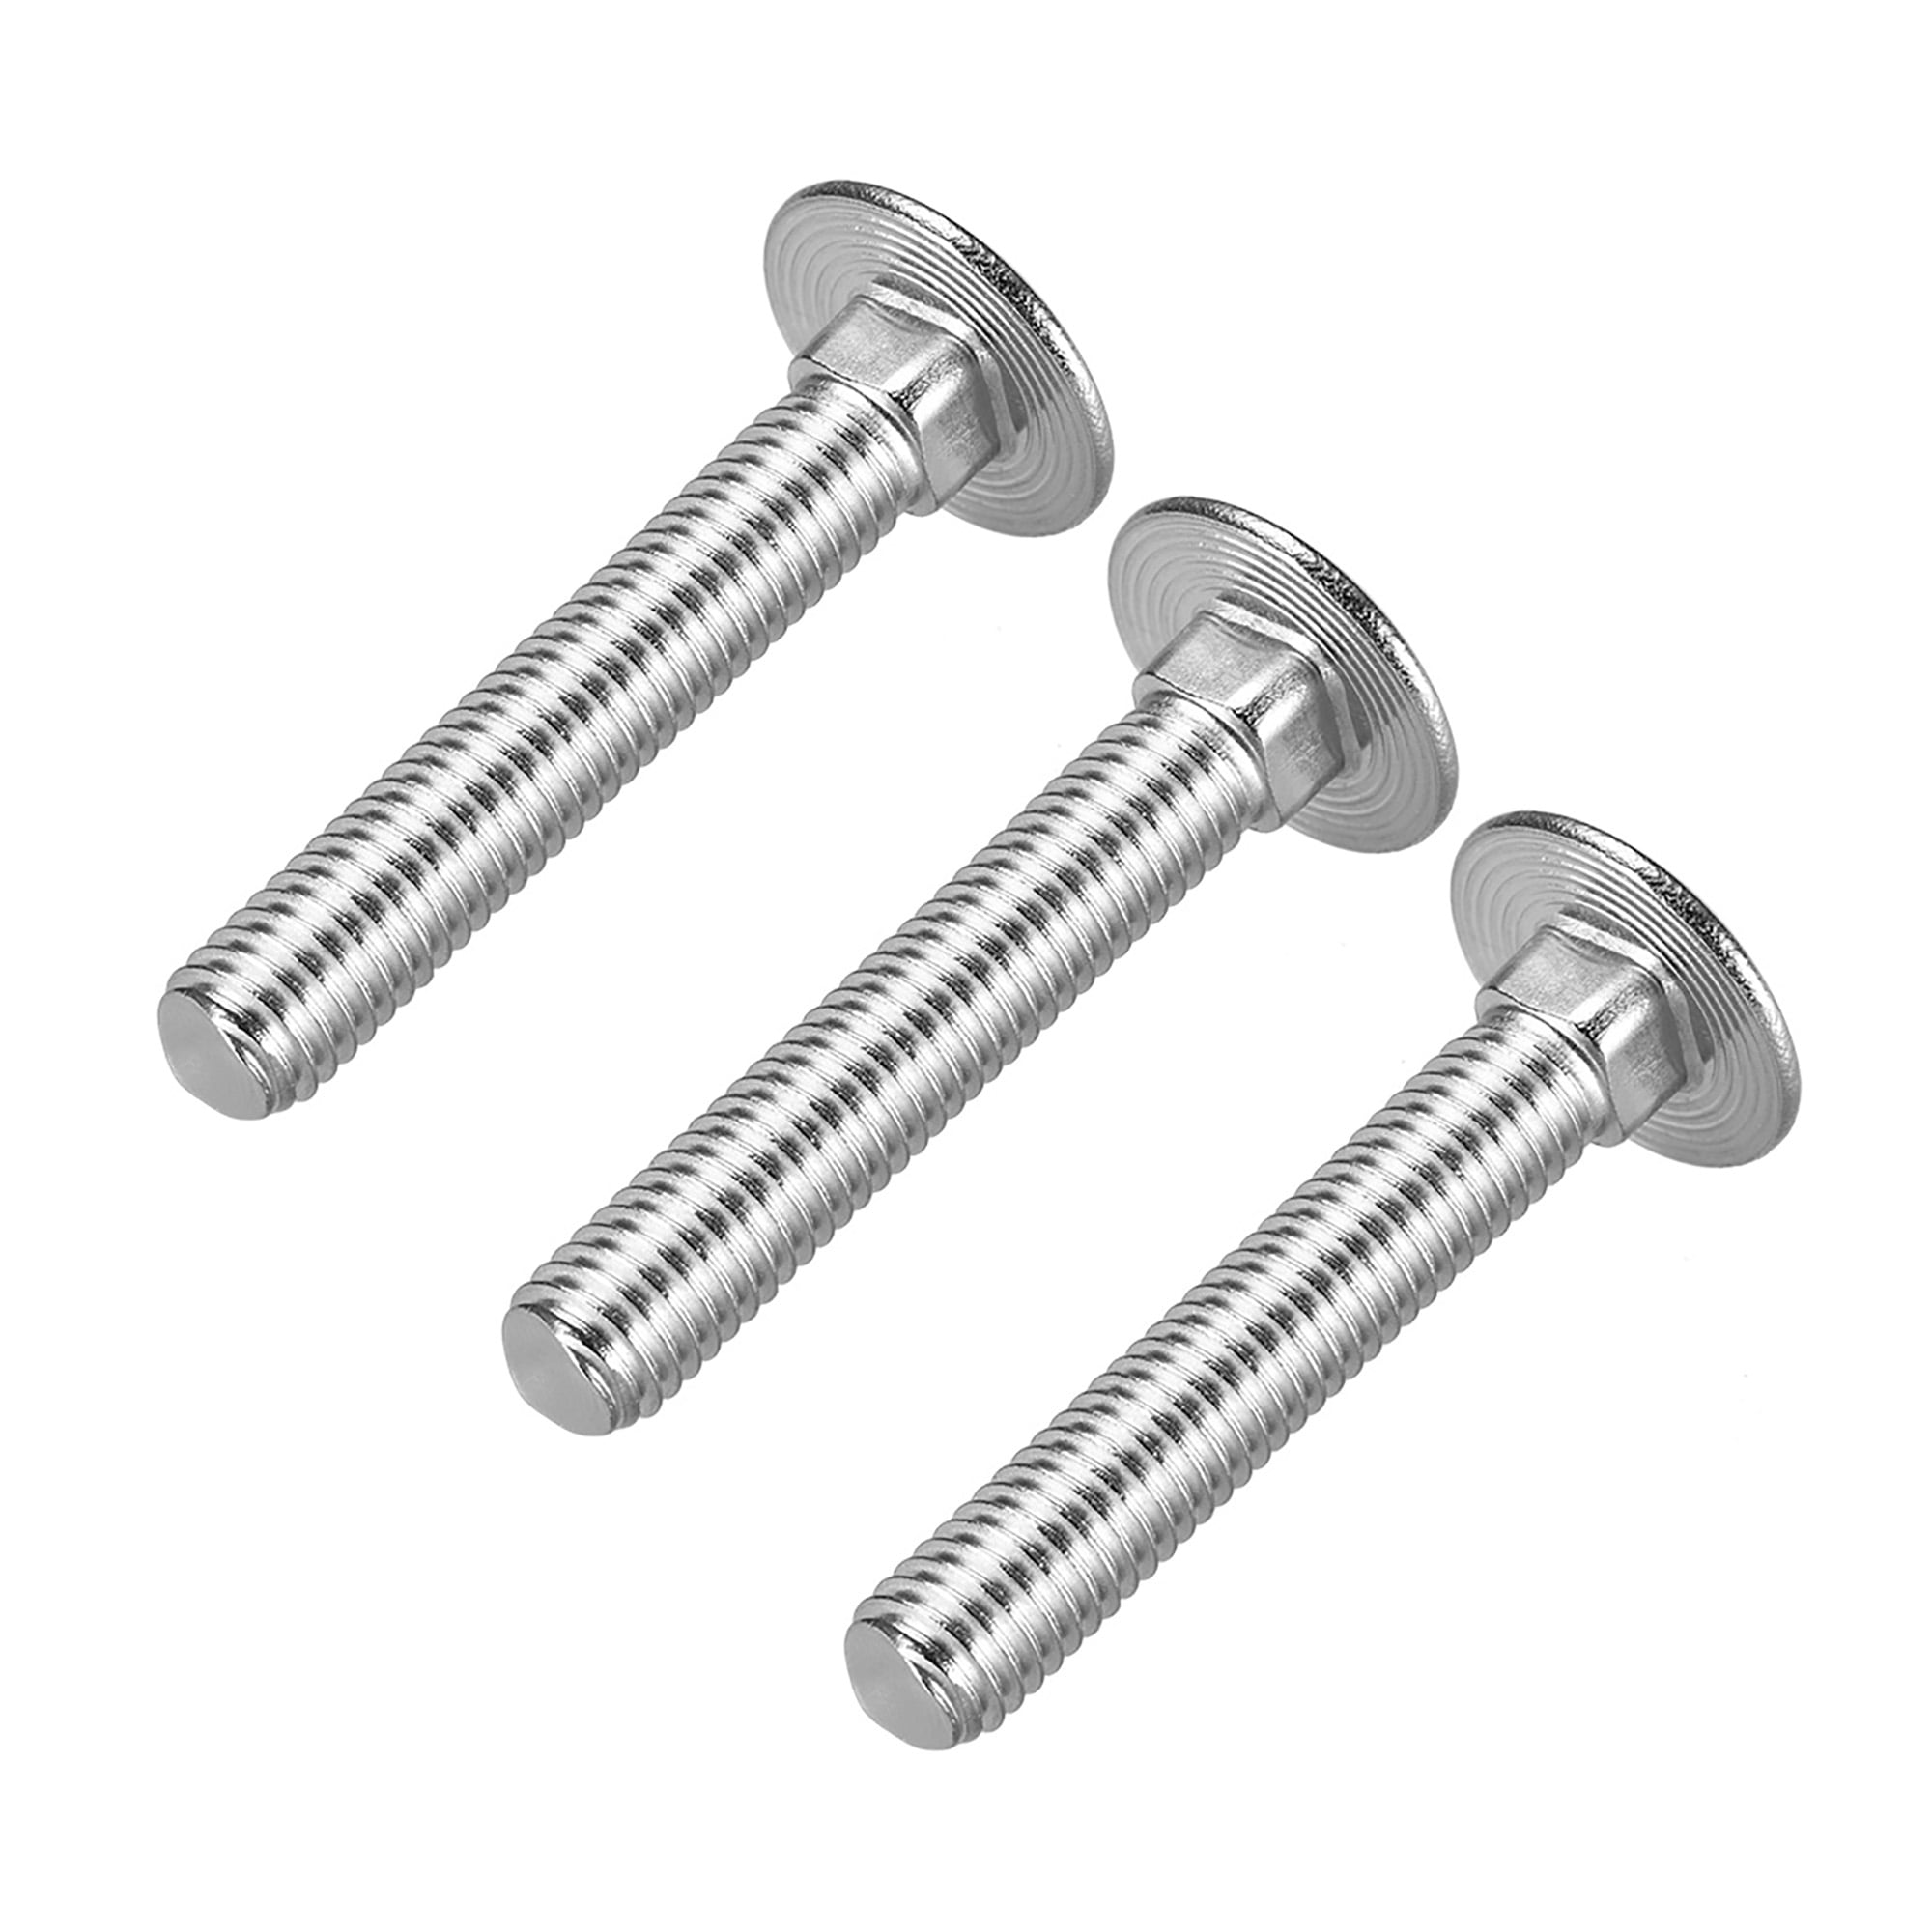 5pcs M8 x 80mm Carriage Bolts Round Head Screw Square Neck Stainless Steel ABBOTT 